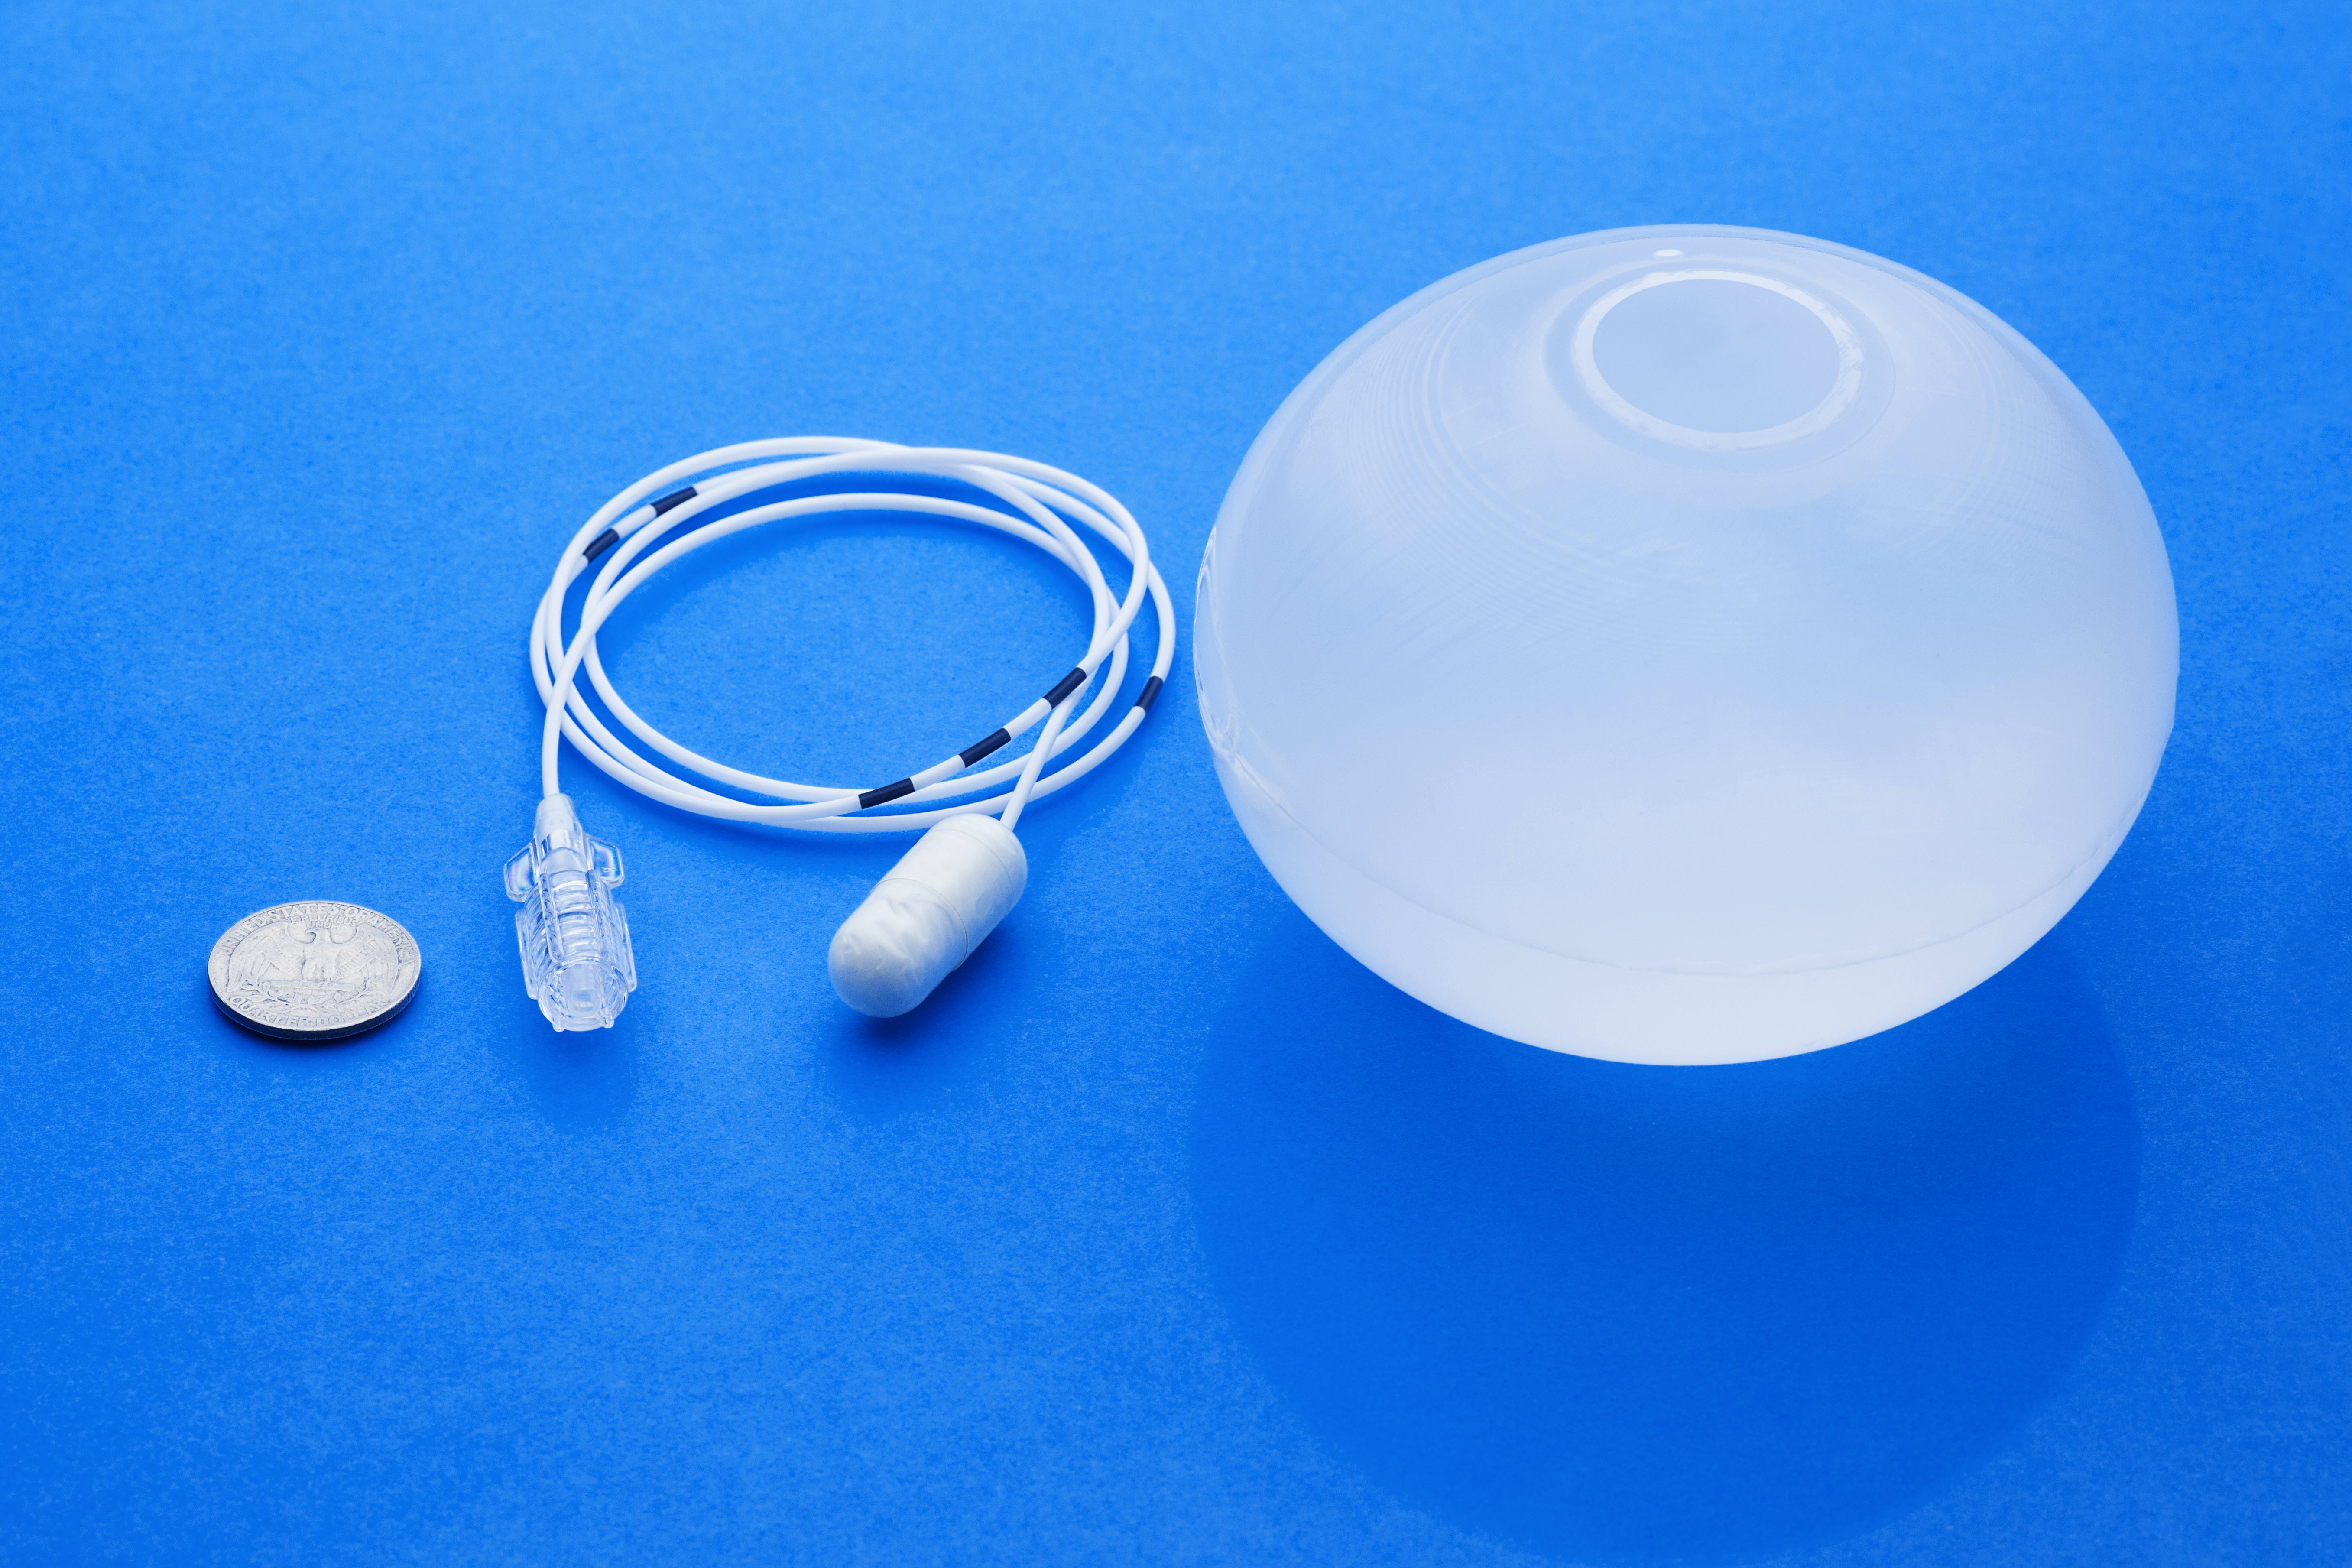 Weight Loss in a Pill Device Firm Allurion Heads to NYSE via SPAC Merger